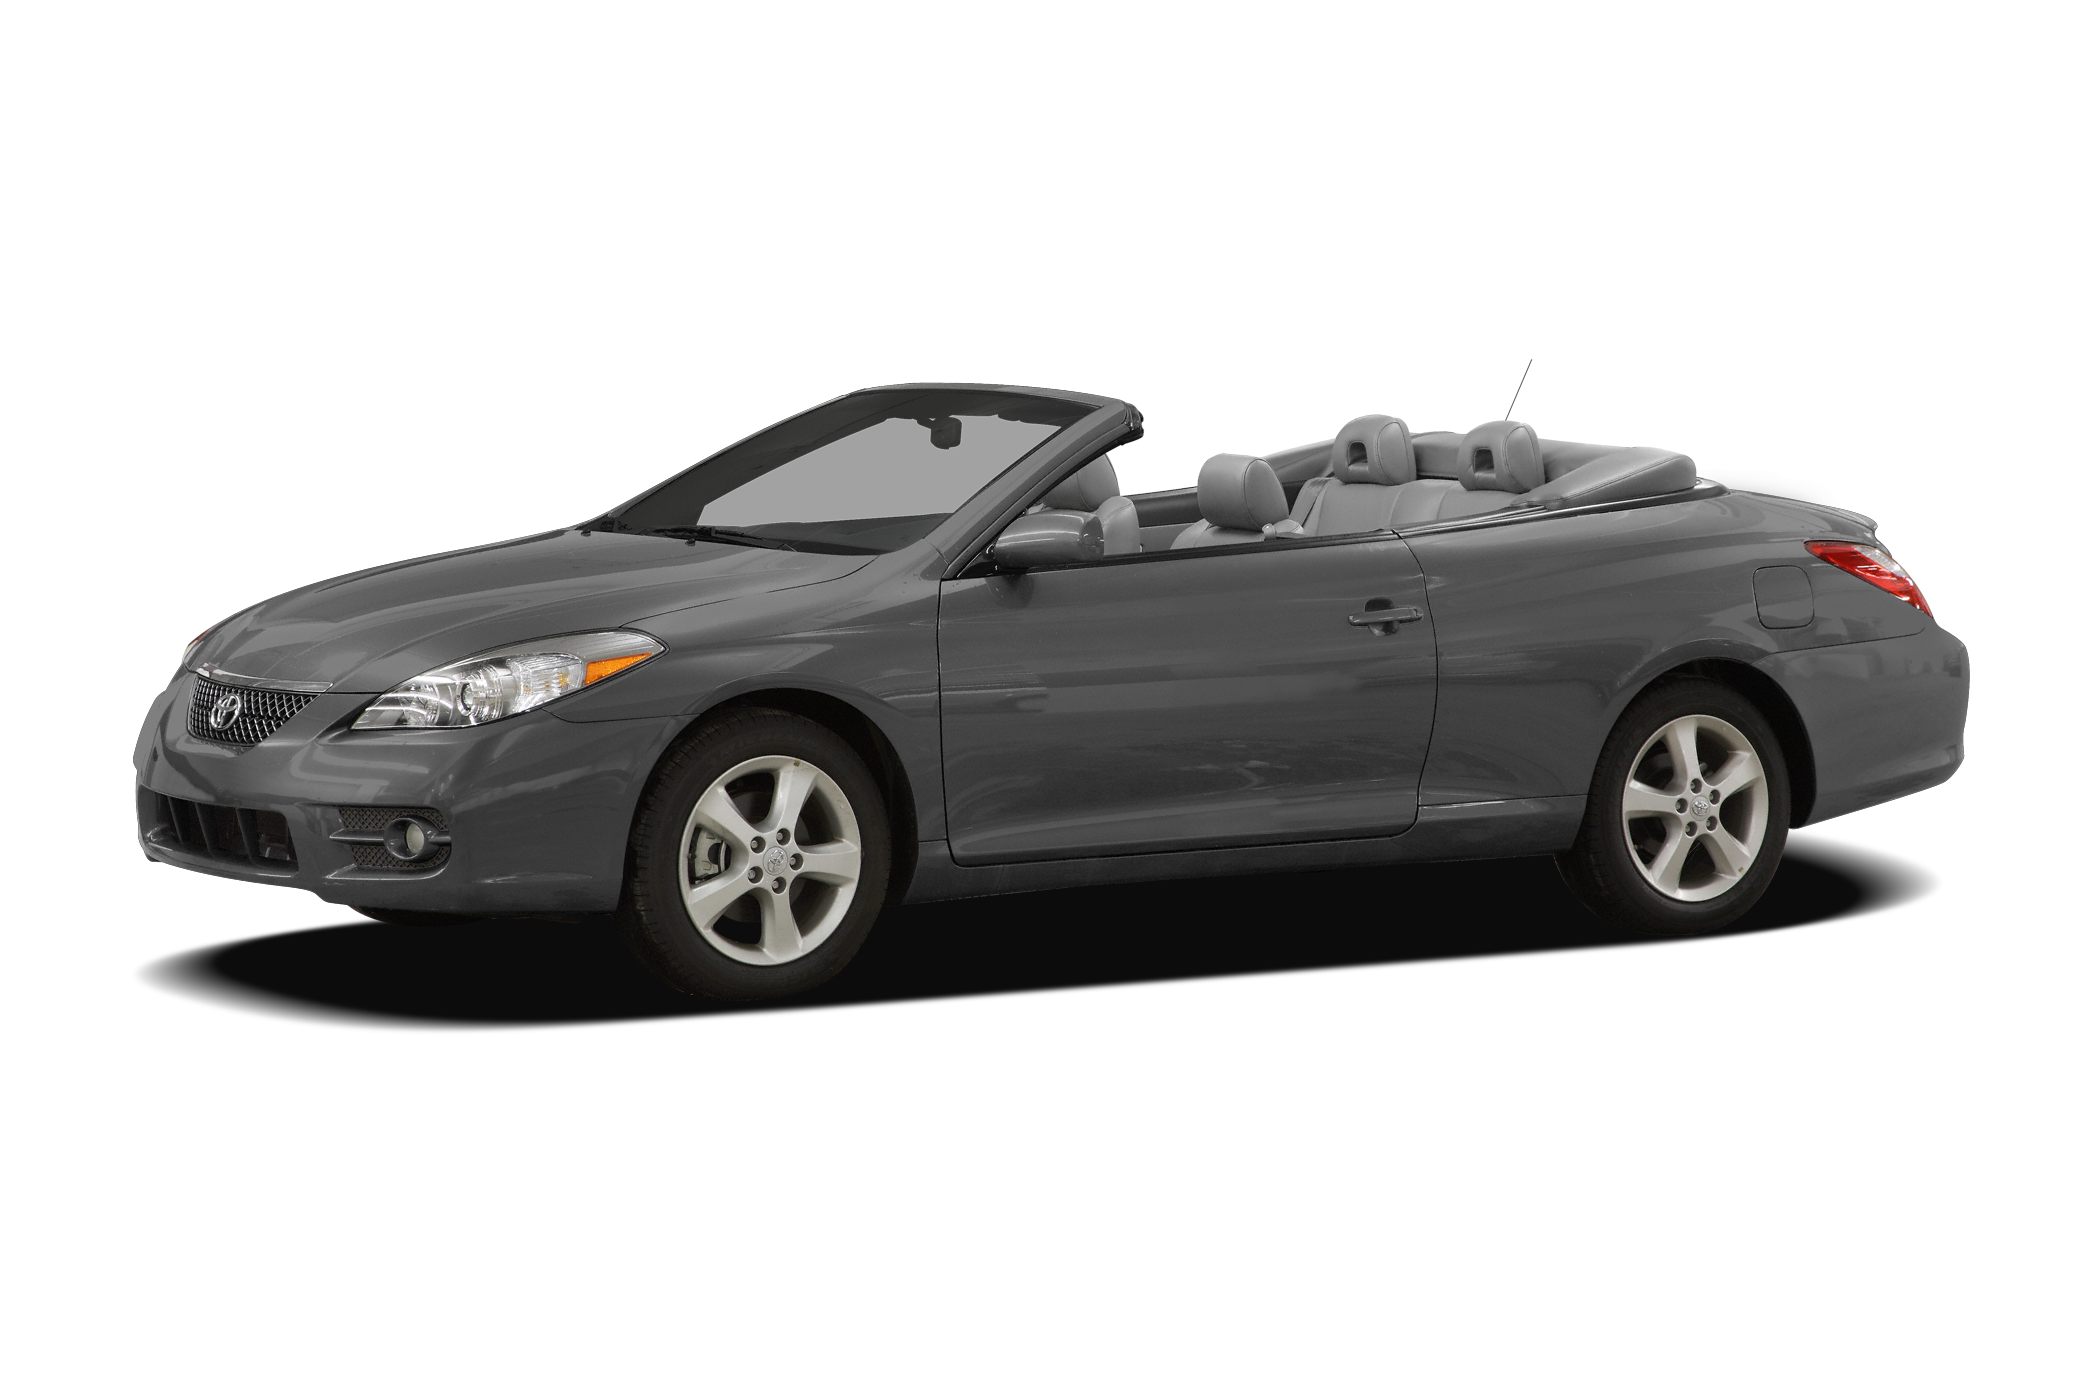 2008 Toyota Camry Solara Sport 2dr Convertible Pictures